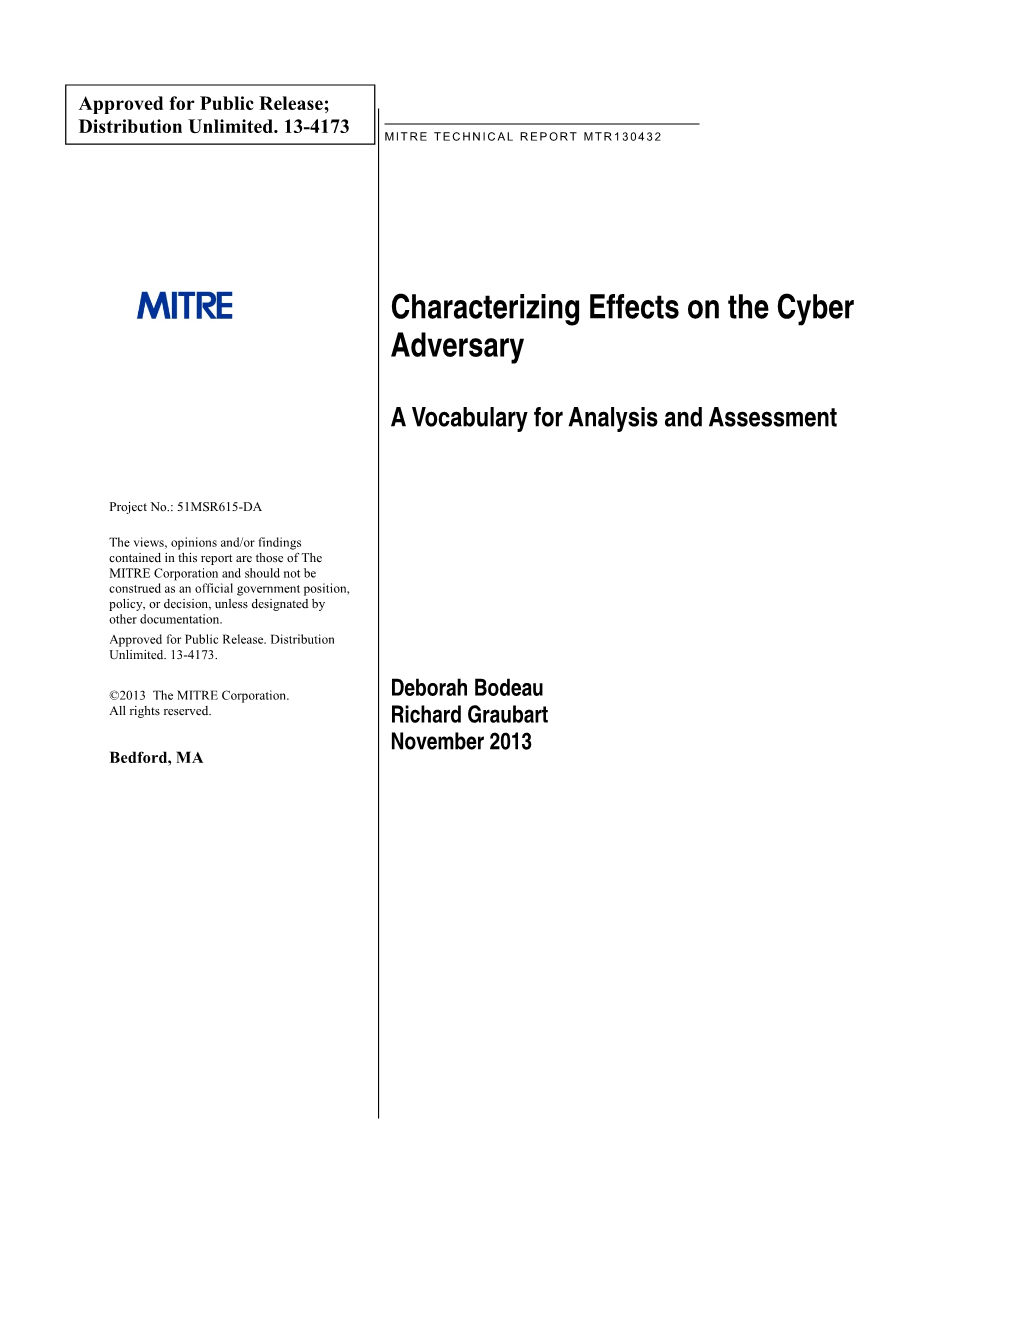 Characterizing Effects on the Cyber Adversary